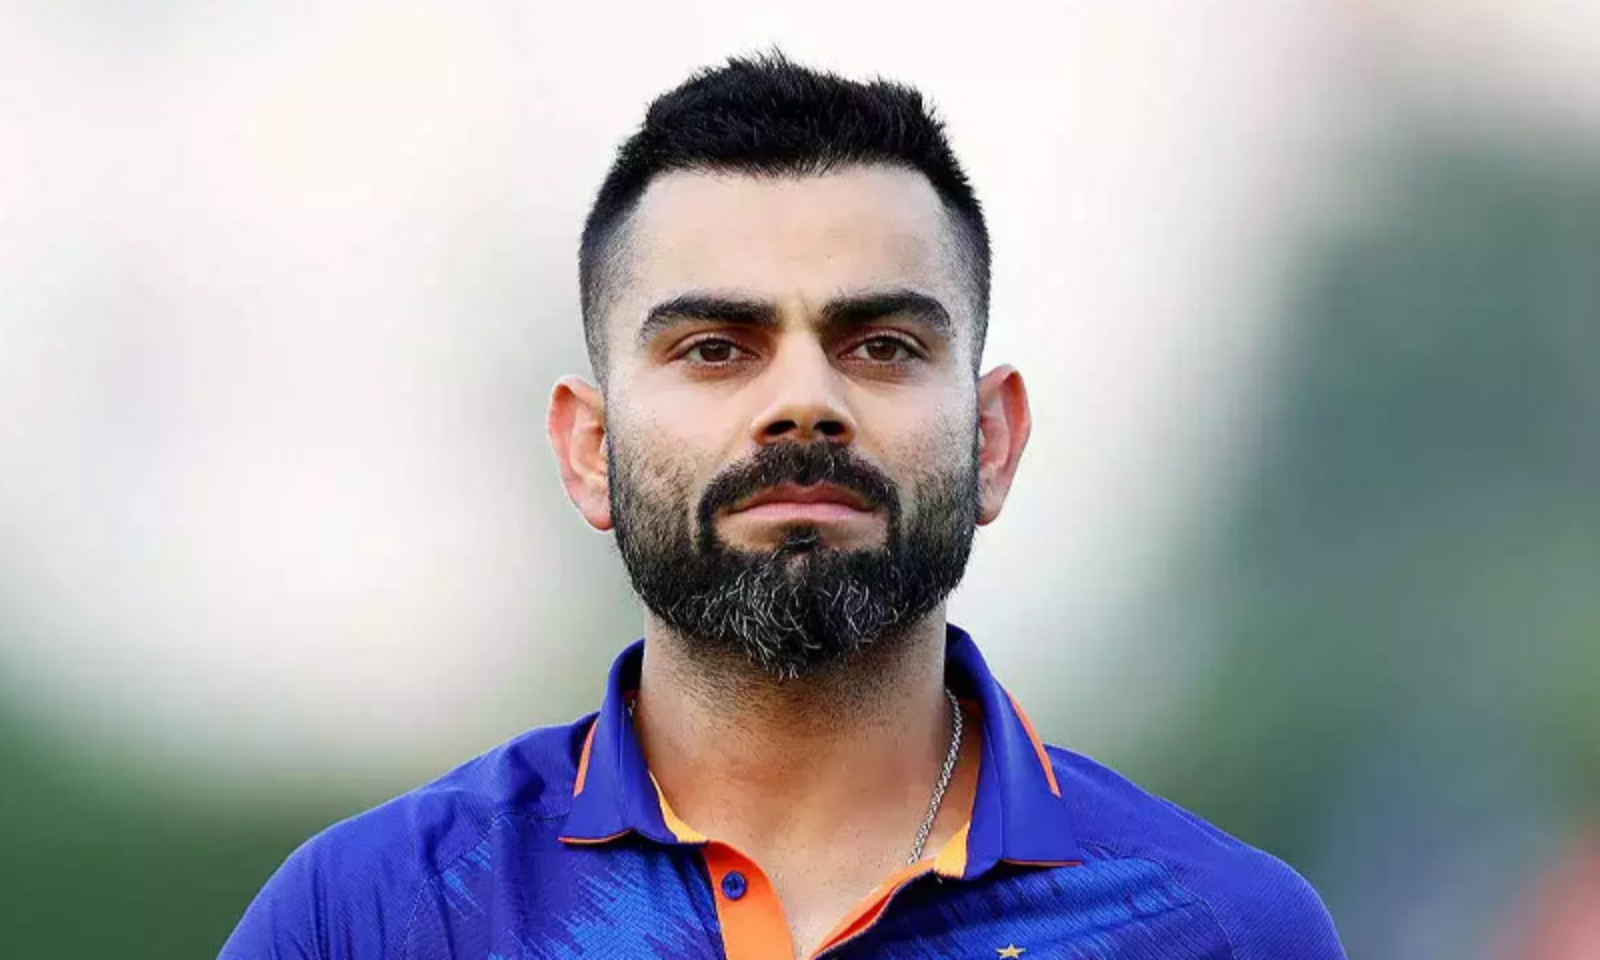 Prima Facie Remarks Not Addressed Directly To Virat Kohli Or Family  (Daughter) – Court While Granting Bail To Man Accused Of Rape Threats  Against Couple's Daughter